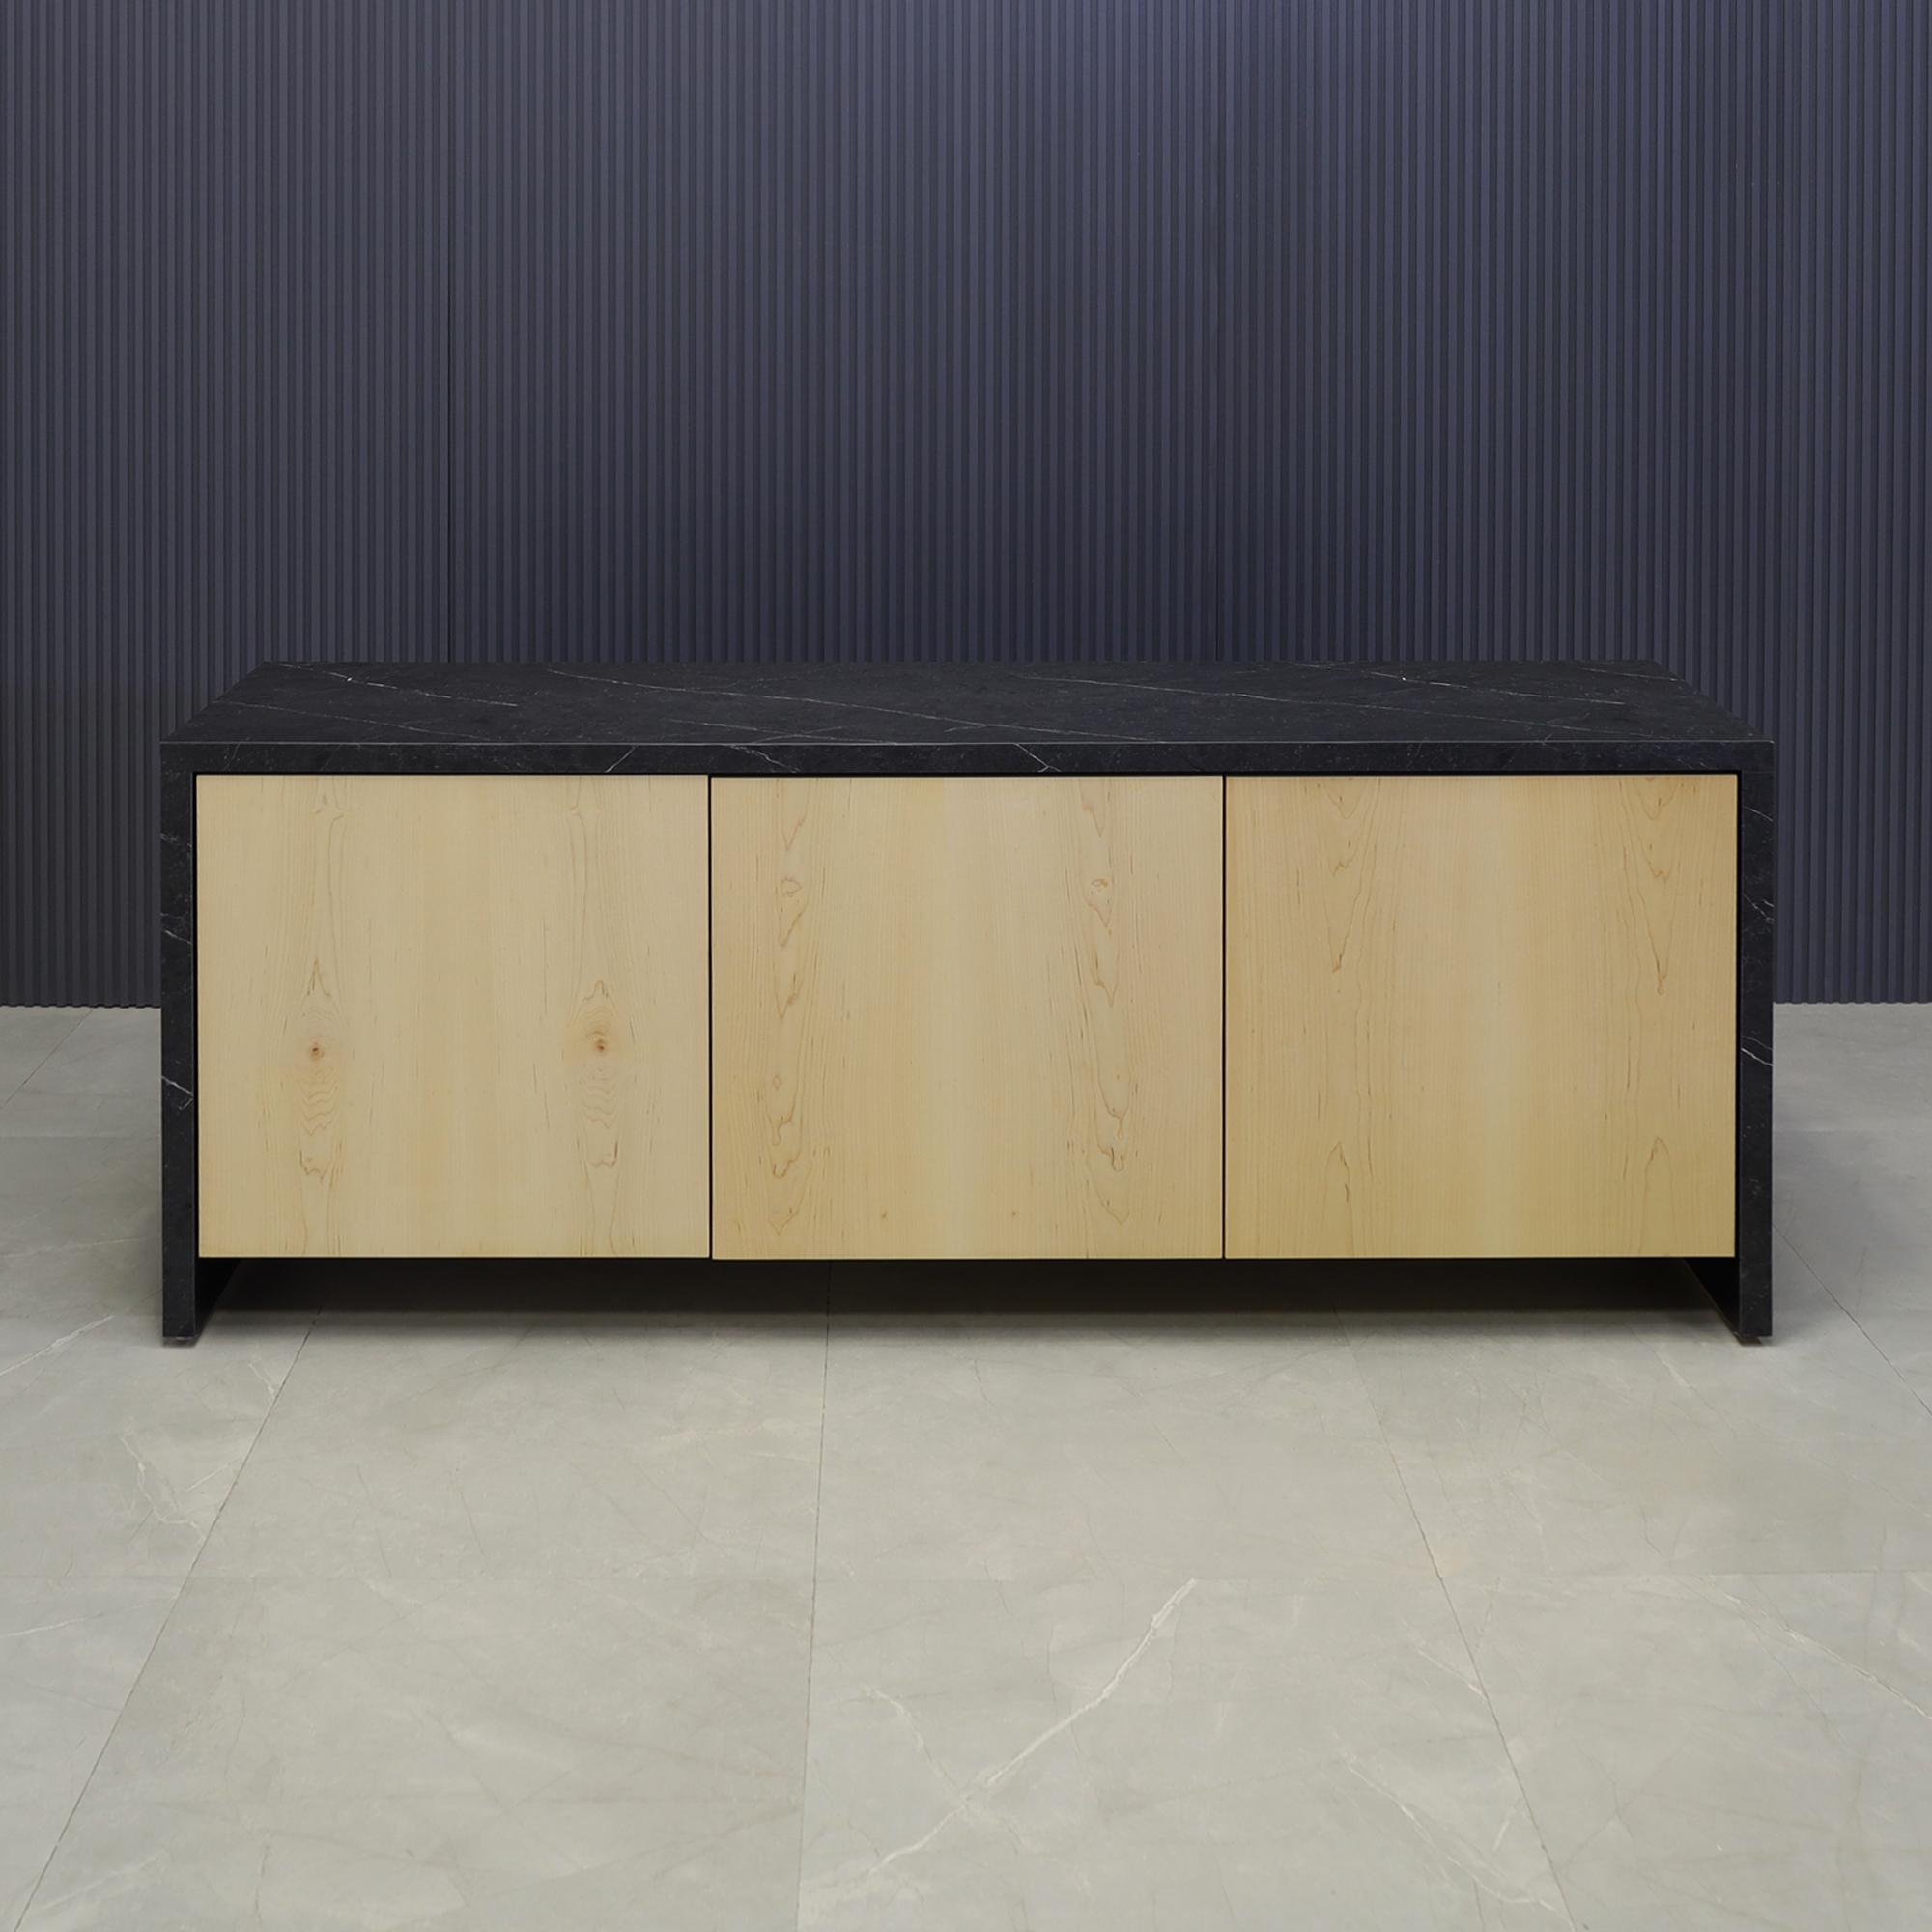 72-inch Boston Storage Credenza in jet sequoia laminate (DISCONTINUED) credenza and maple veneer doors, shown here.